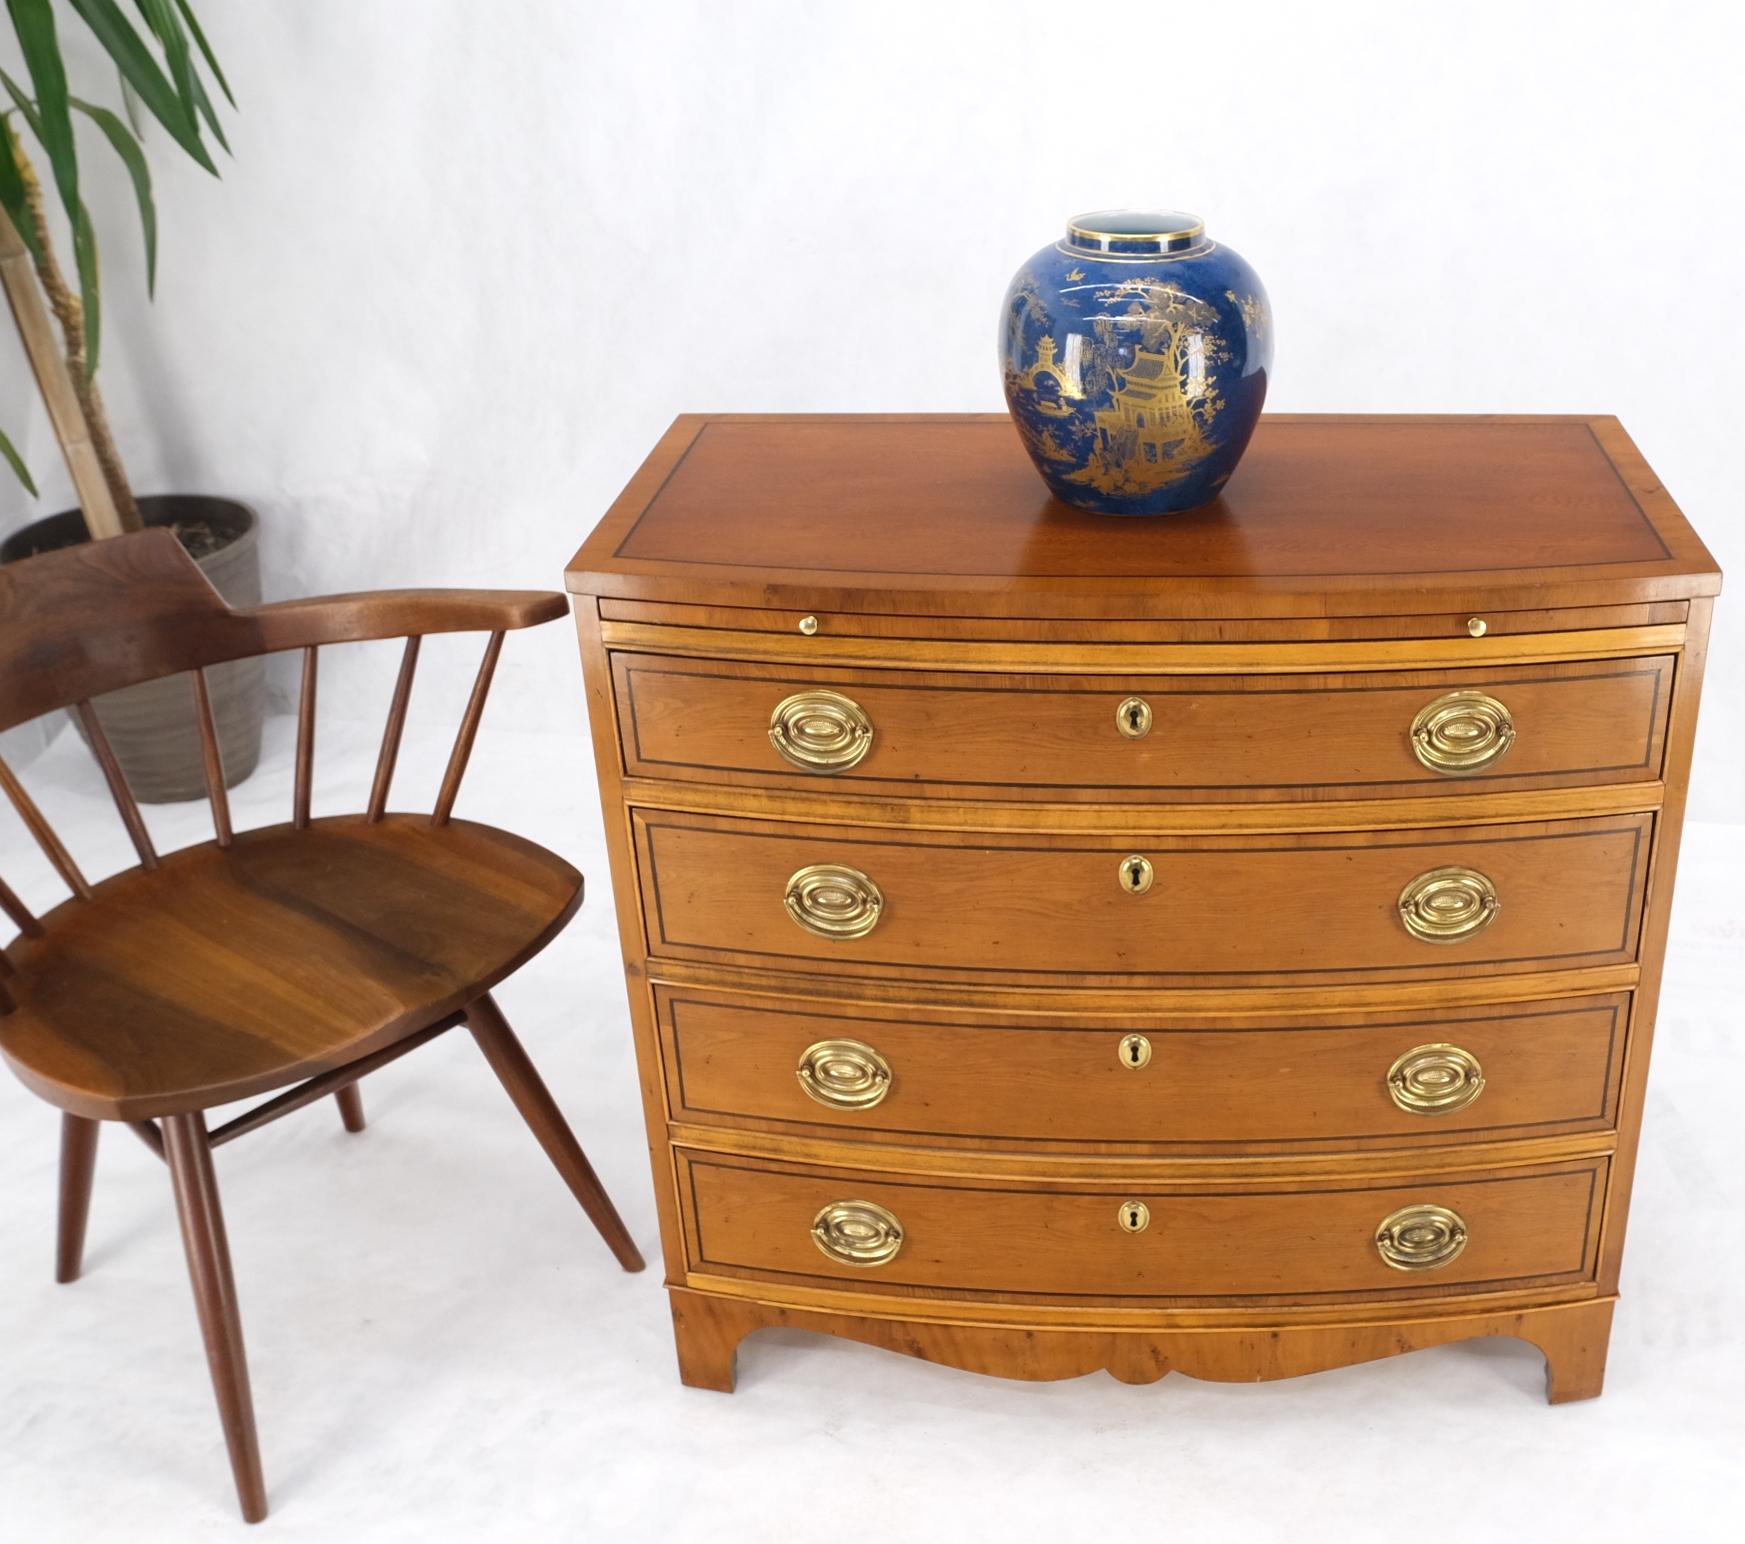 Mahogany exceptional bow front 4 drawers pull out tray brass hardware bachelor chest dresser.